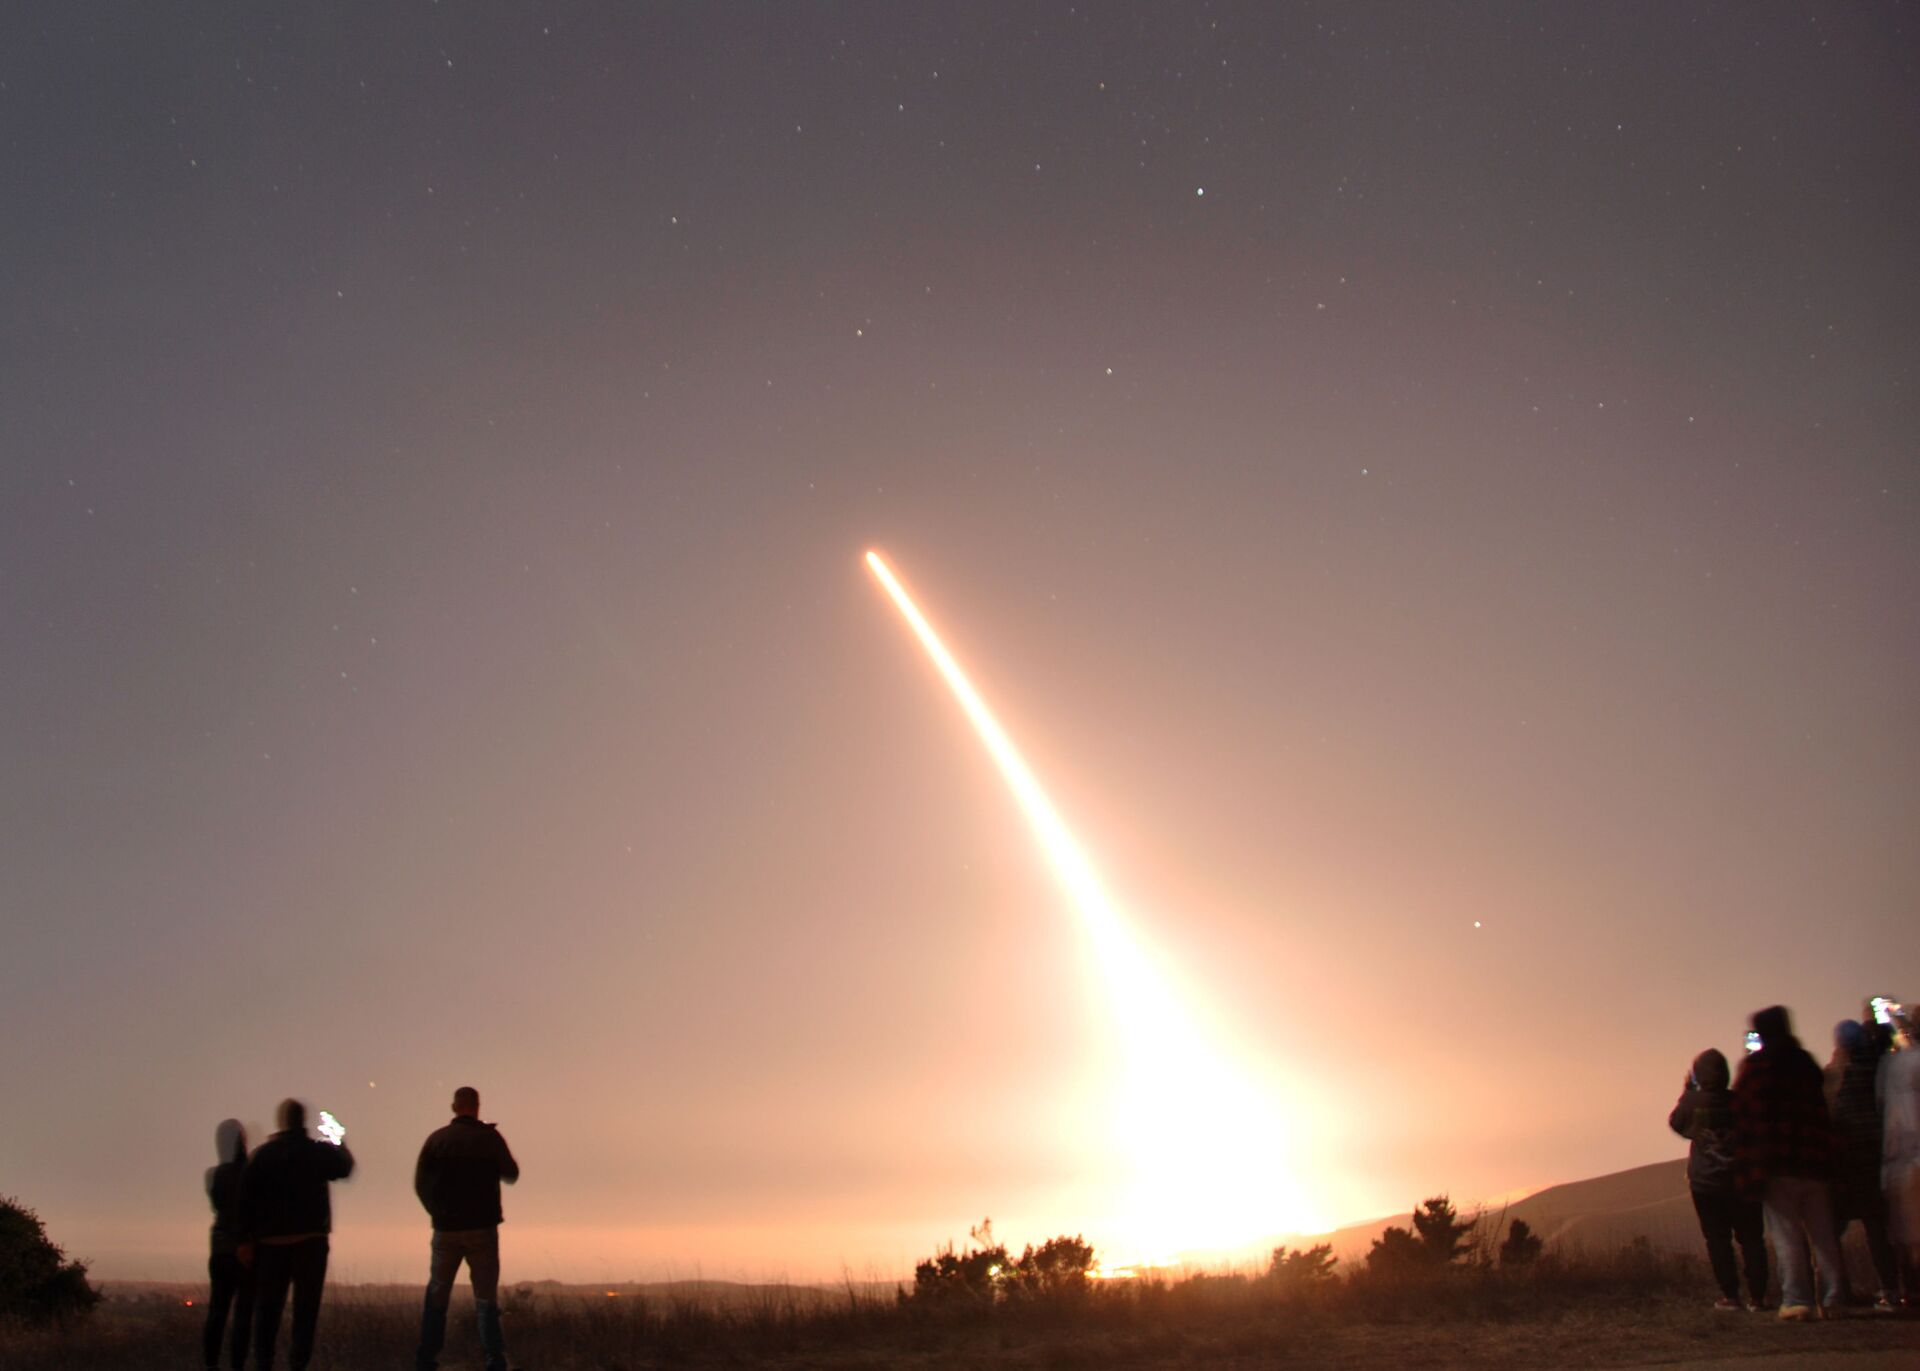 An Air Force Global Strike Command unarmed Minuteman III intercontinental ballistic missile launches during an operational test at 12:27 a.m. Pacific Time, Thursday, Oct. 29, 2020, at Vandenberg Air Force Base, California. - Sputnik International, 1920, 04.01.2022